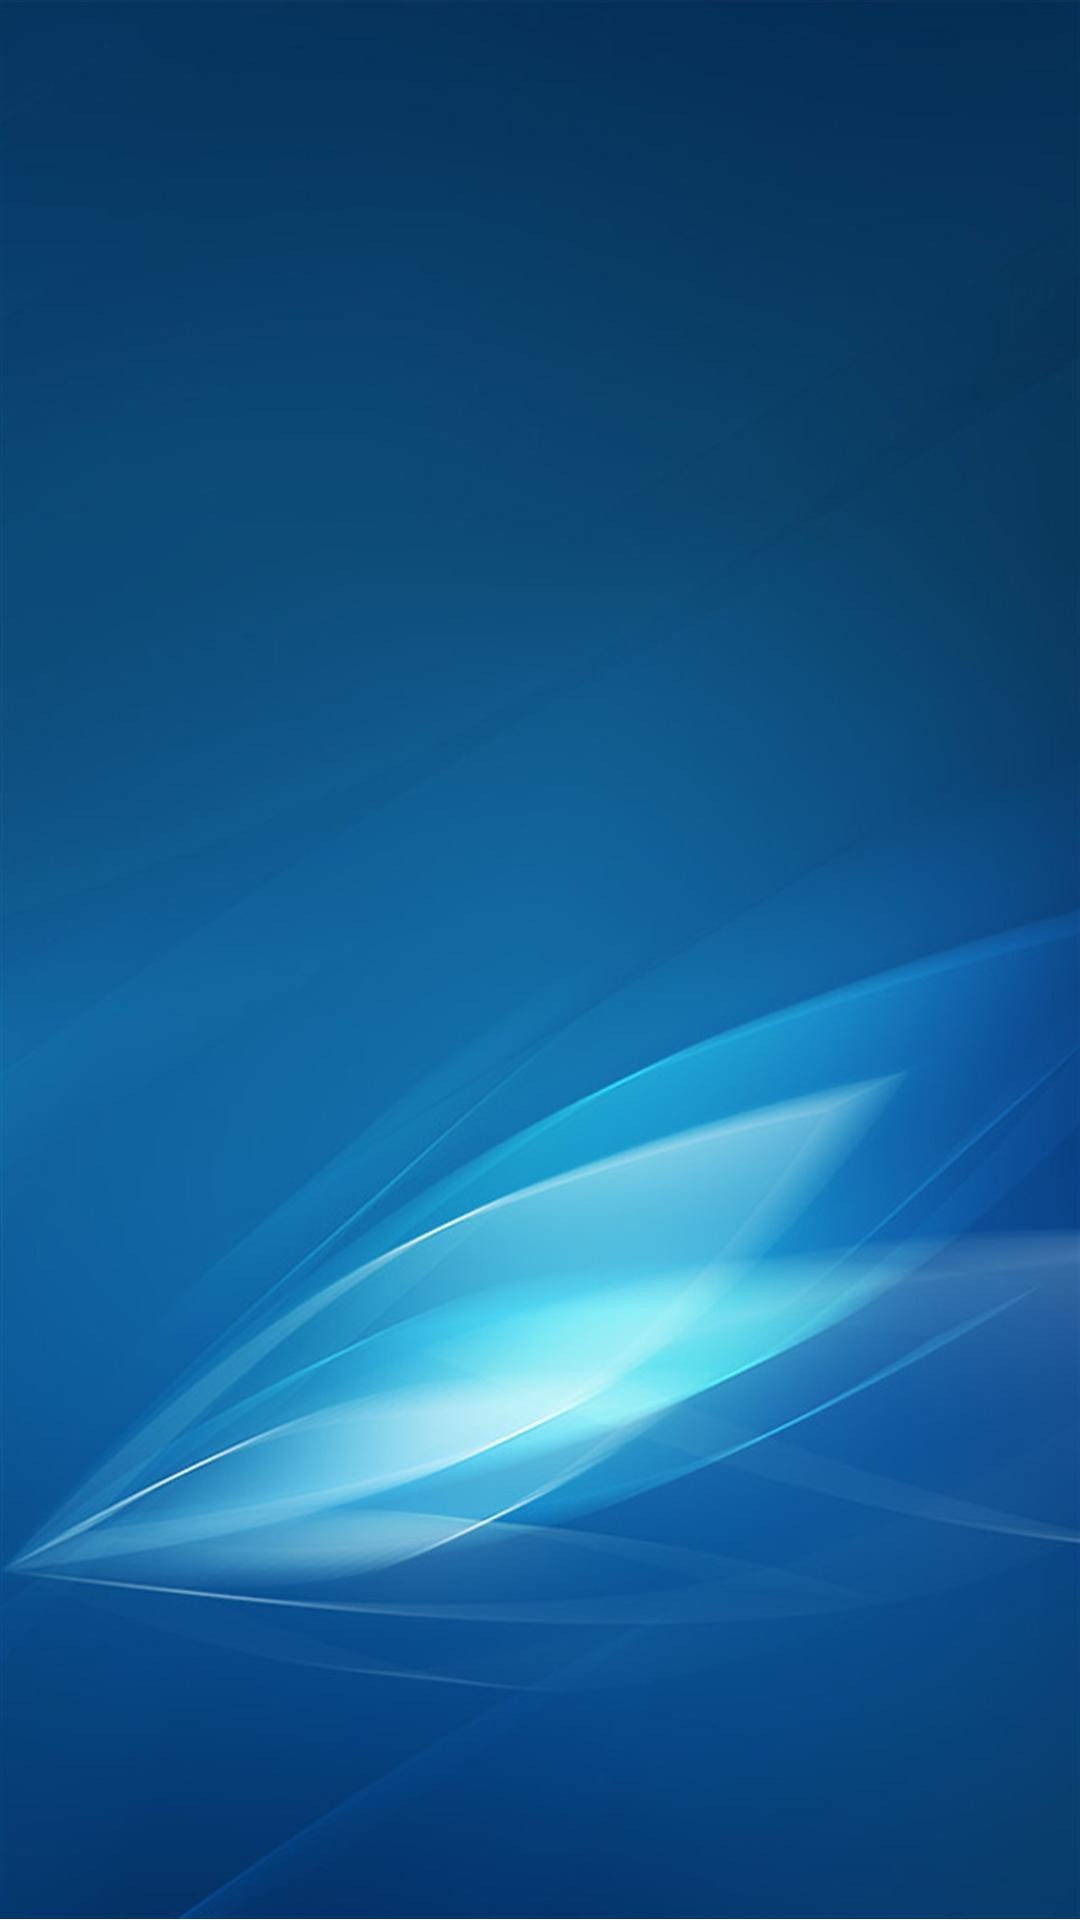 Best Htc One Wallpapers, Free And Easy To Download - Wallpaper - 1080x1920  Wallpaper 